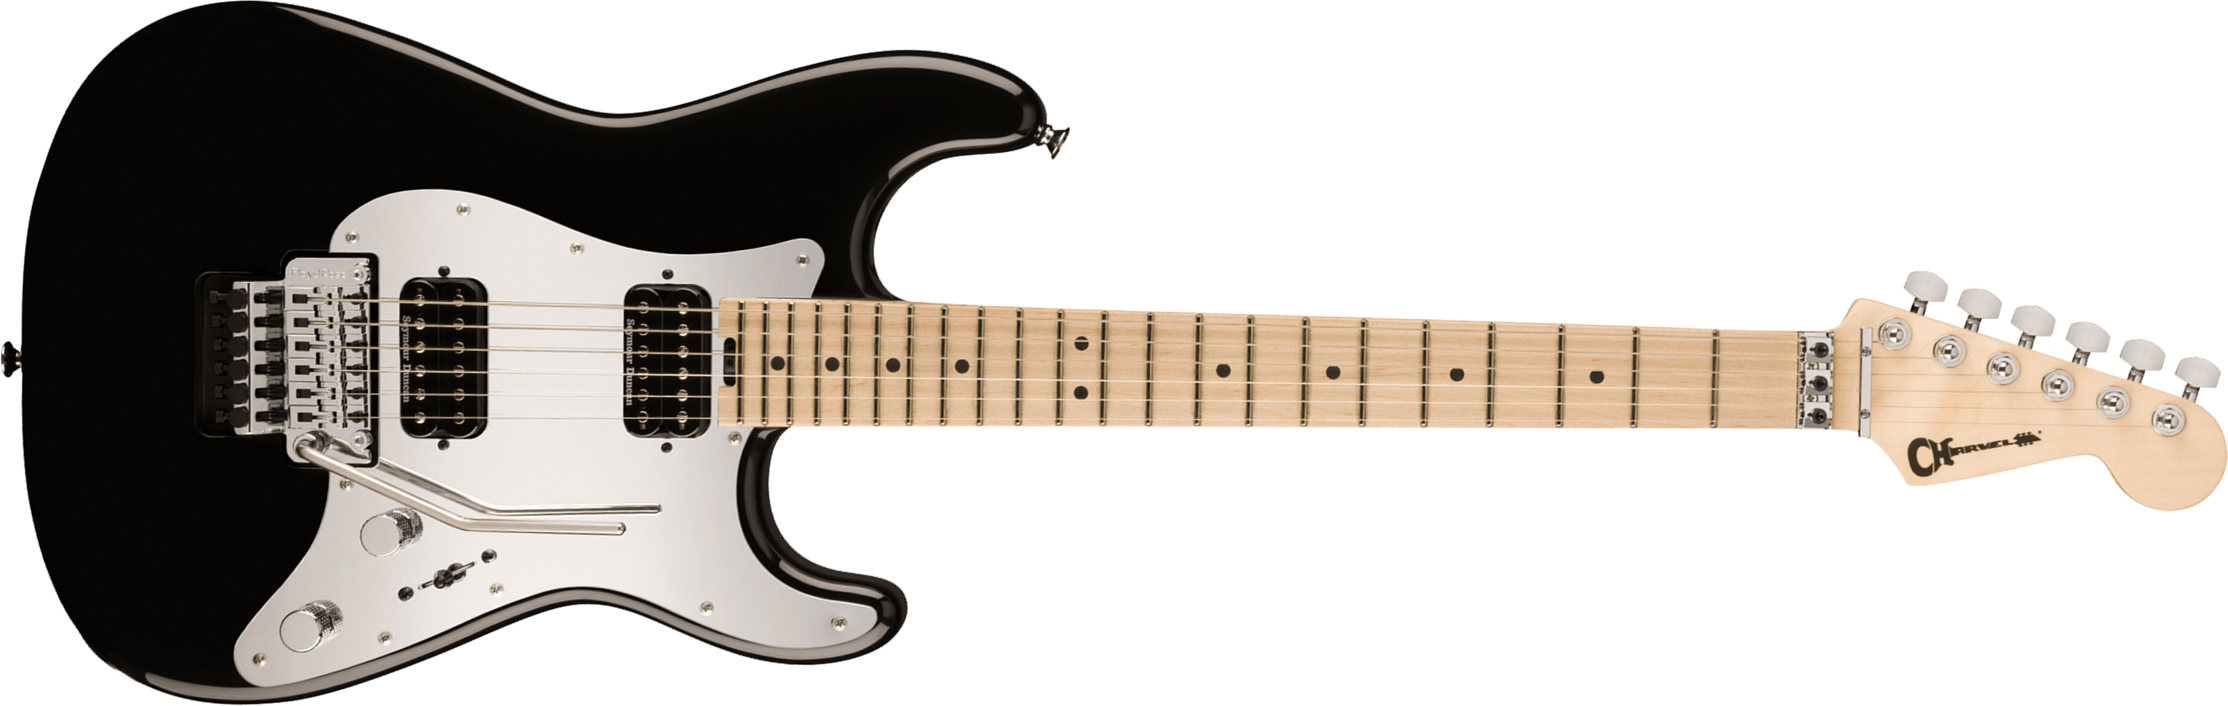 Charvel Pro-mod So-cal Style 1 Hh Fr M 2h Seymour Duncan Mn - Gloss Black - E-Gitarre in Str-Form - Main picture